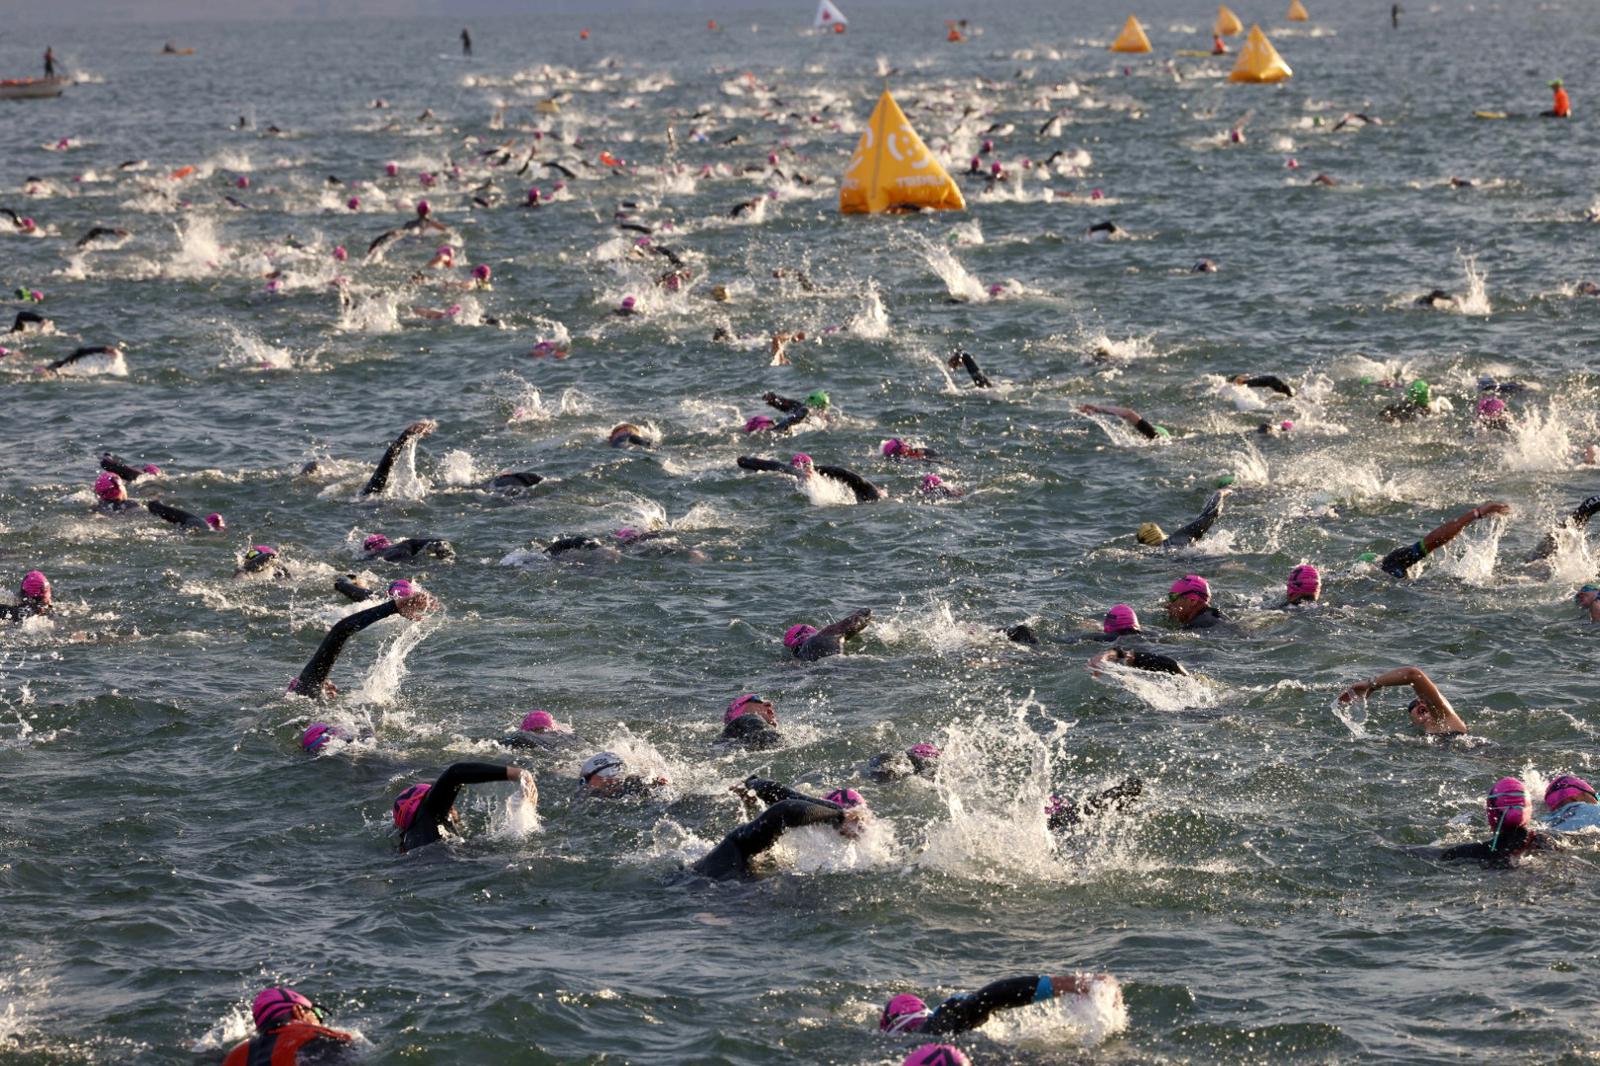 Ironman-Israel Middle East Championship 2022, © Ronen Topelberg